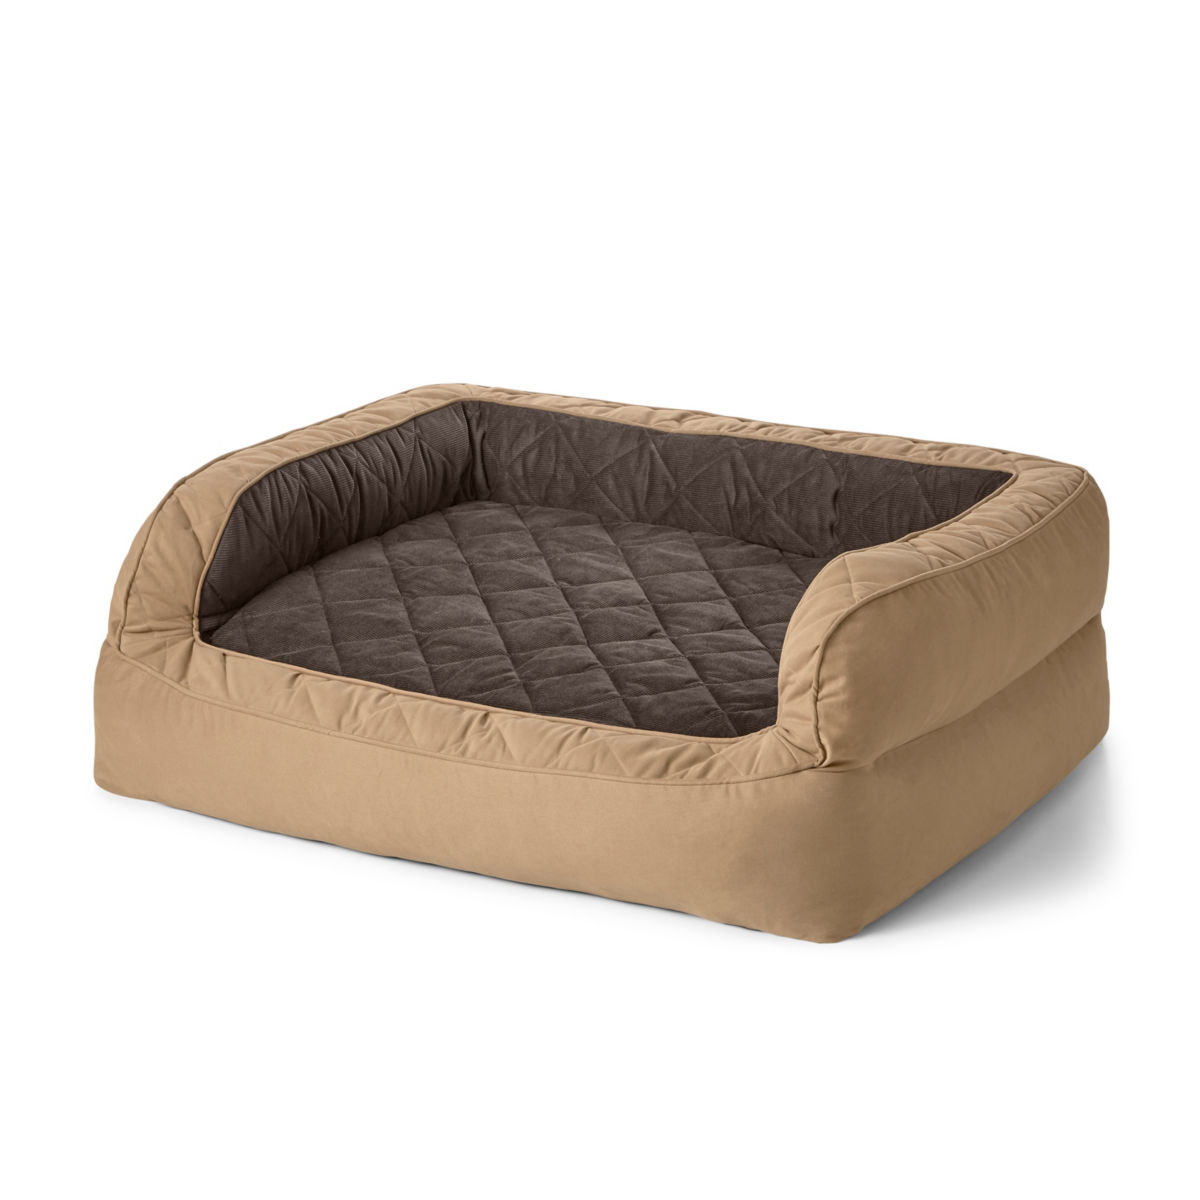 Orvis AirFoam Heritage Couch Dog Bed - FIELD KHAKIimage number 0